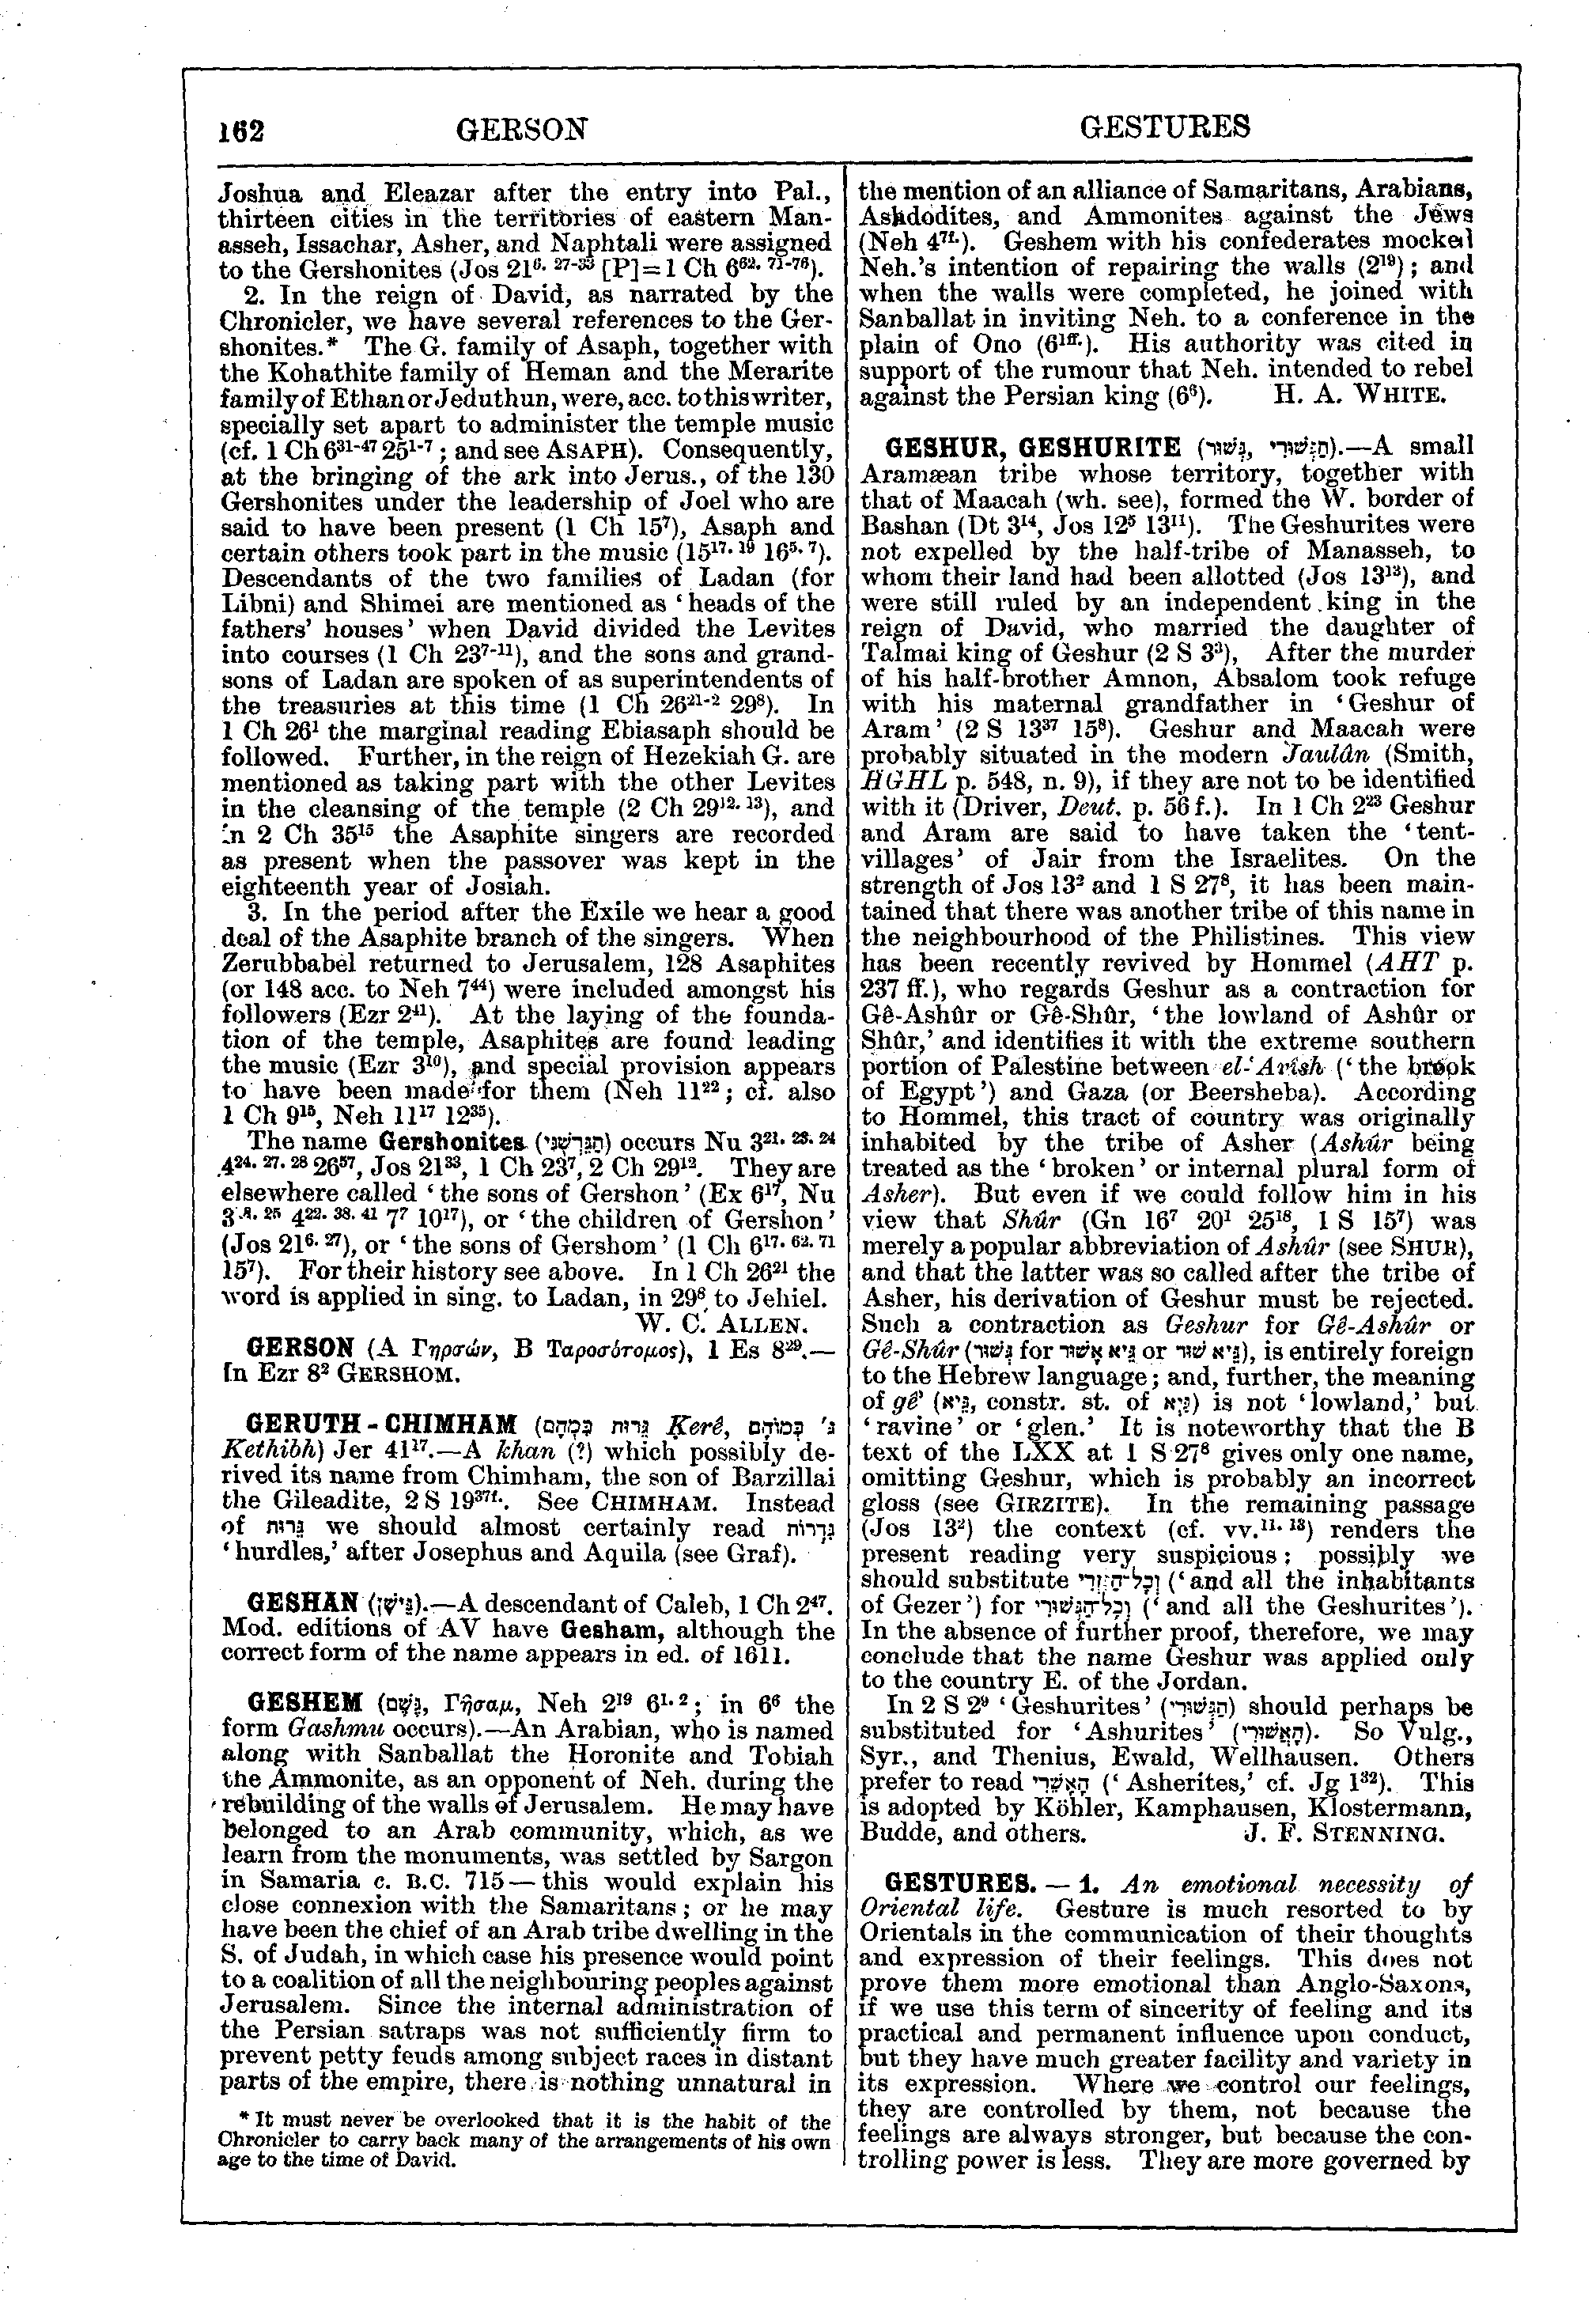 Image of page 162